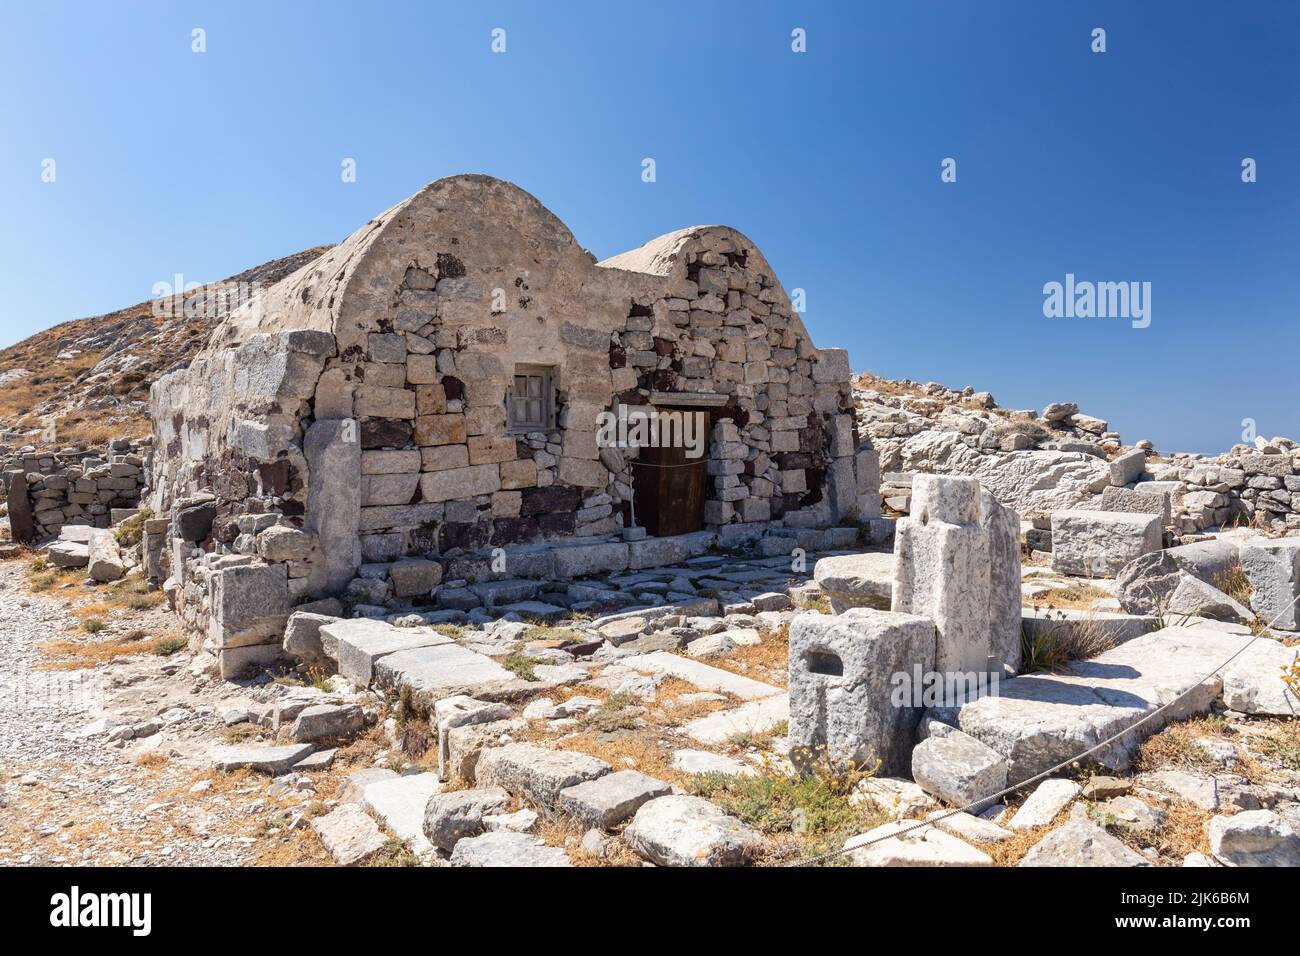 Church of Agios Stefanos (Saint Stephen) in the Archaeological Site of Ancient Thera in Santorini, Cyclades islands, Greece, Europe Stock Photo